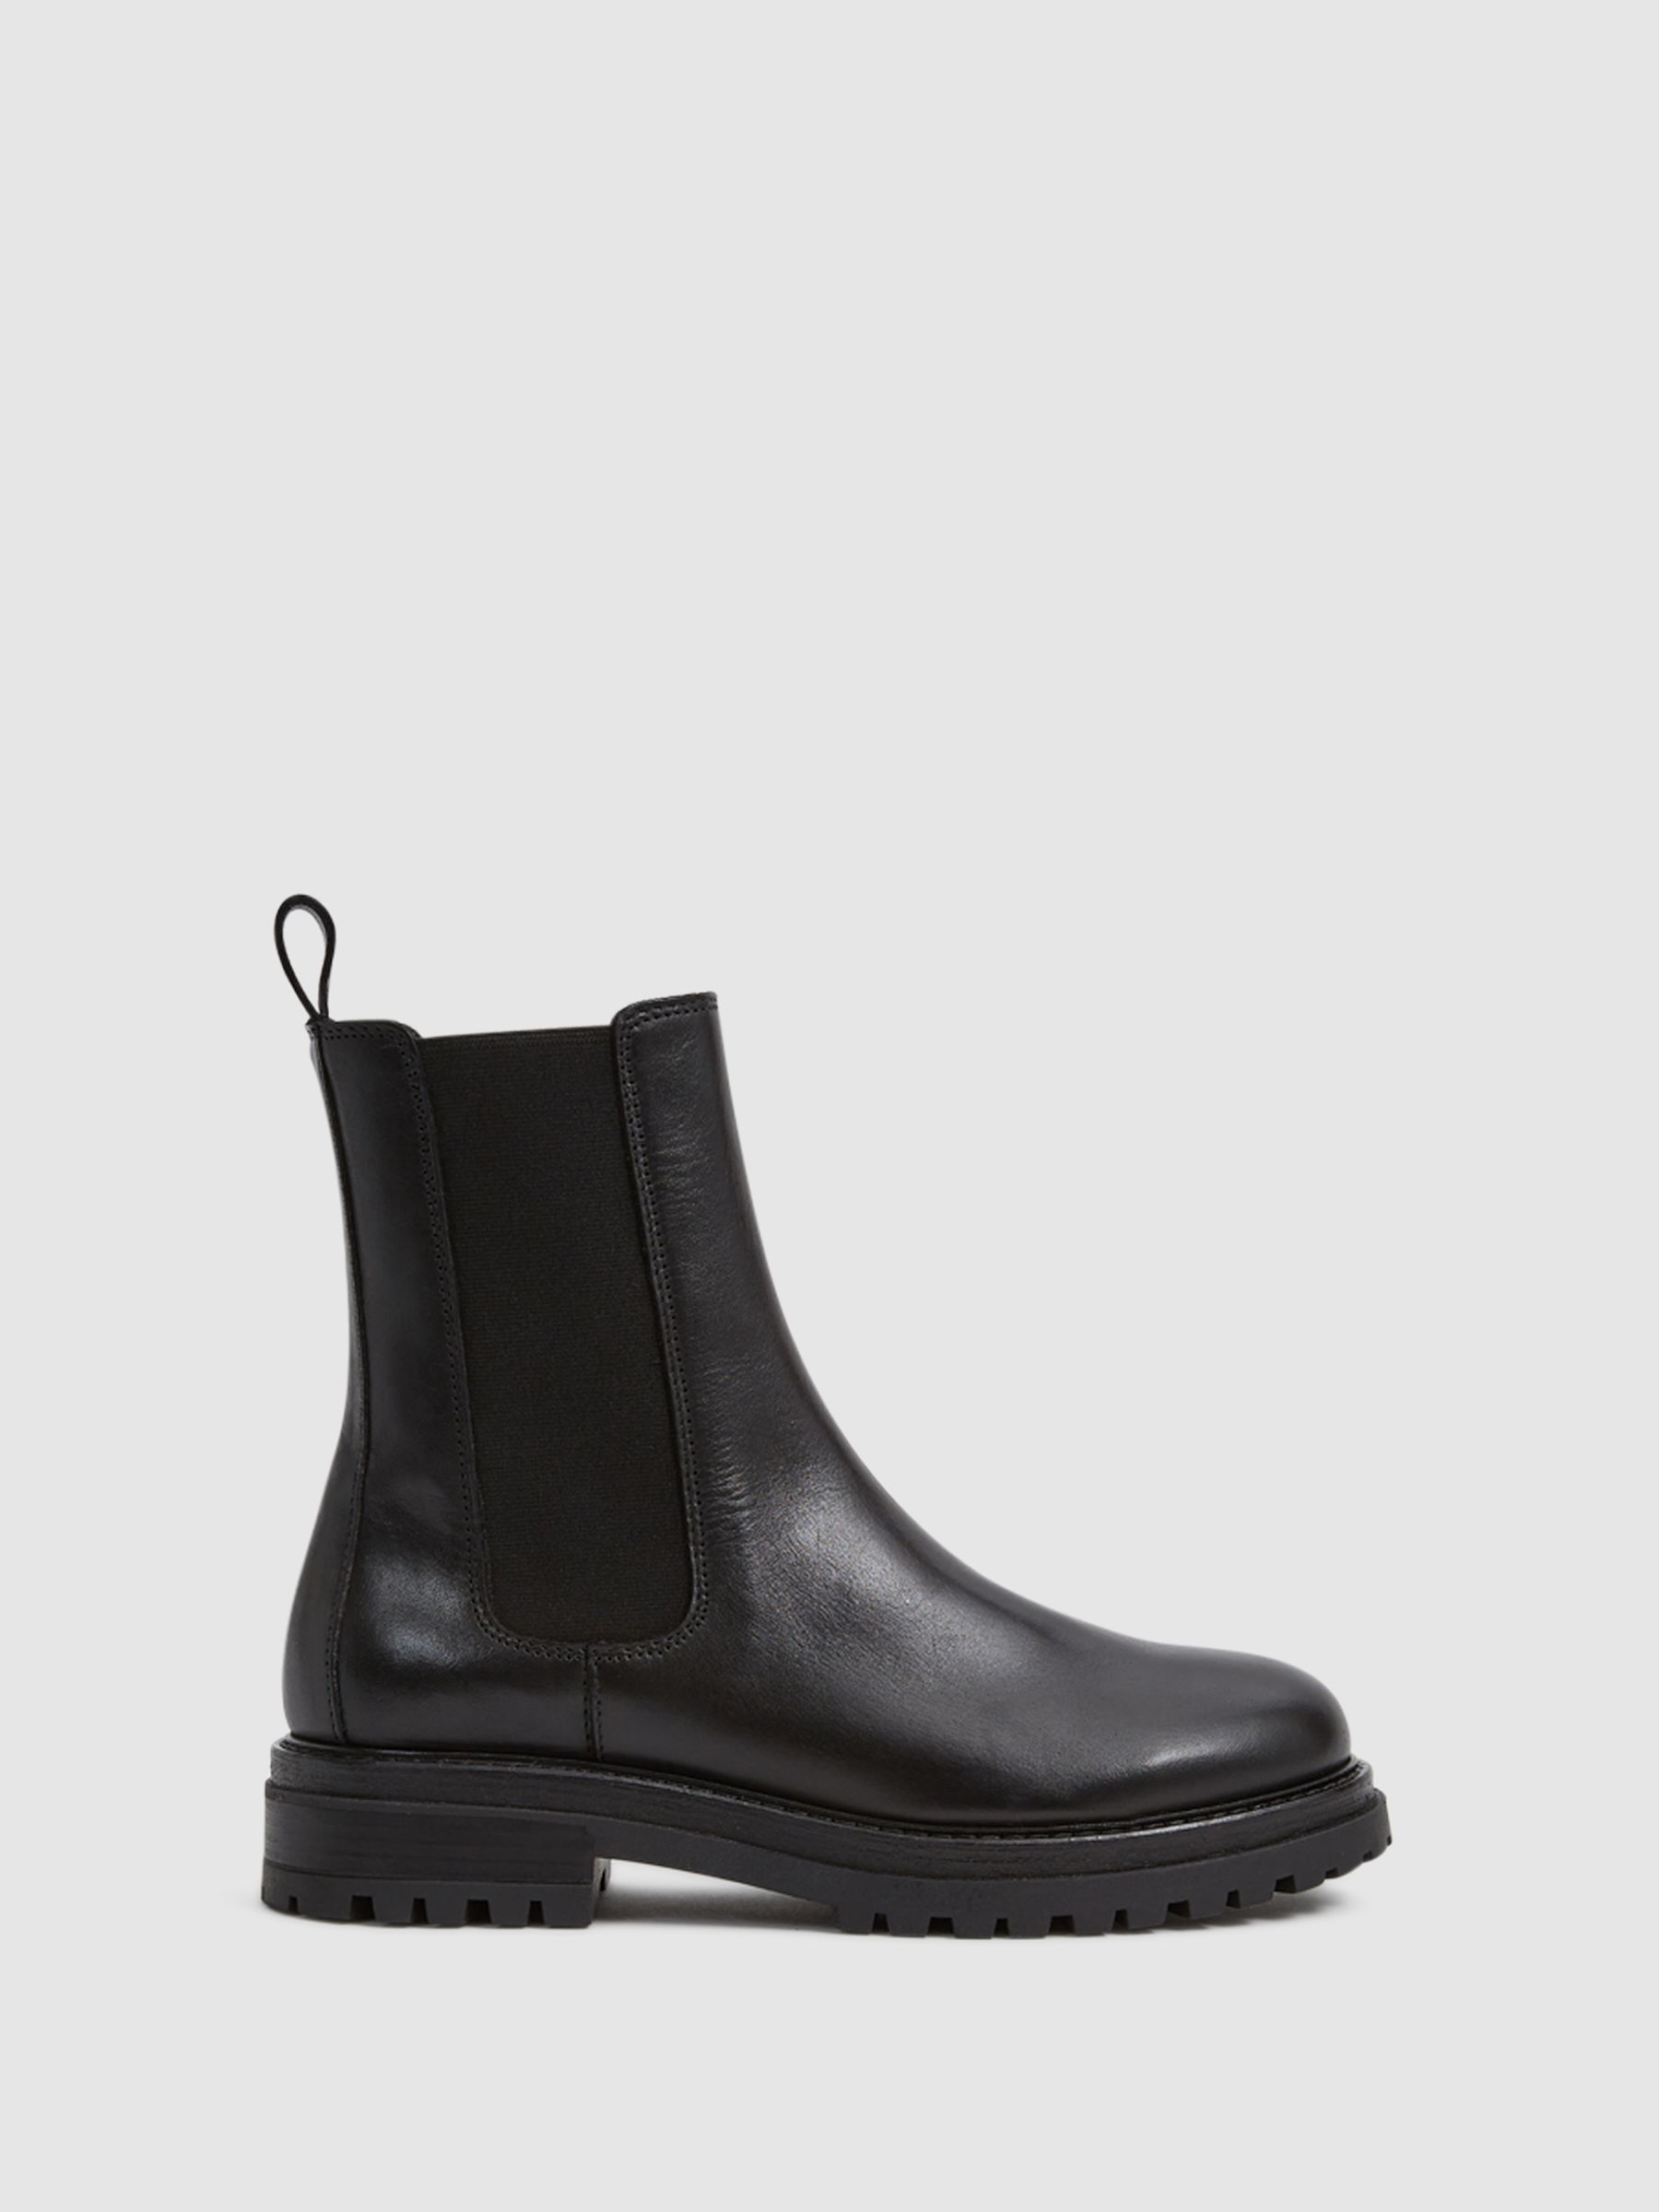 Reiss Thea Leather Pull On Chelsea Boots - REISS